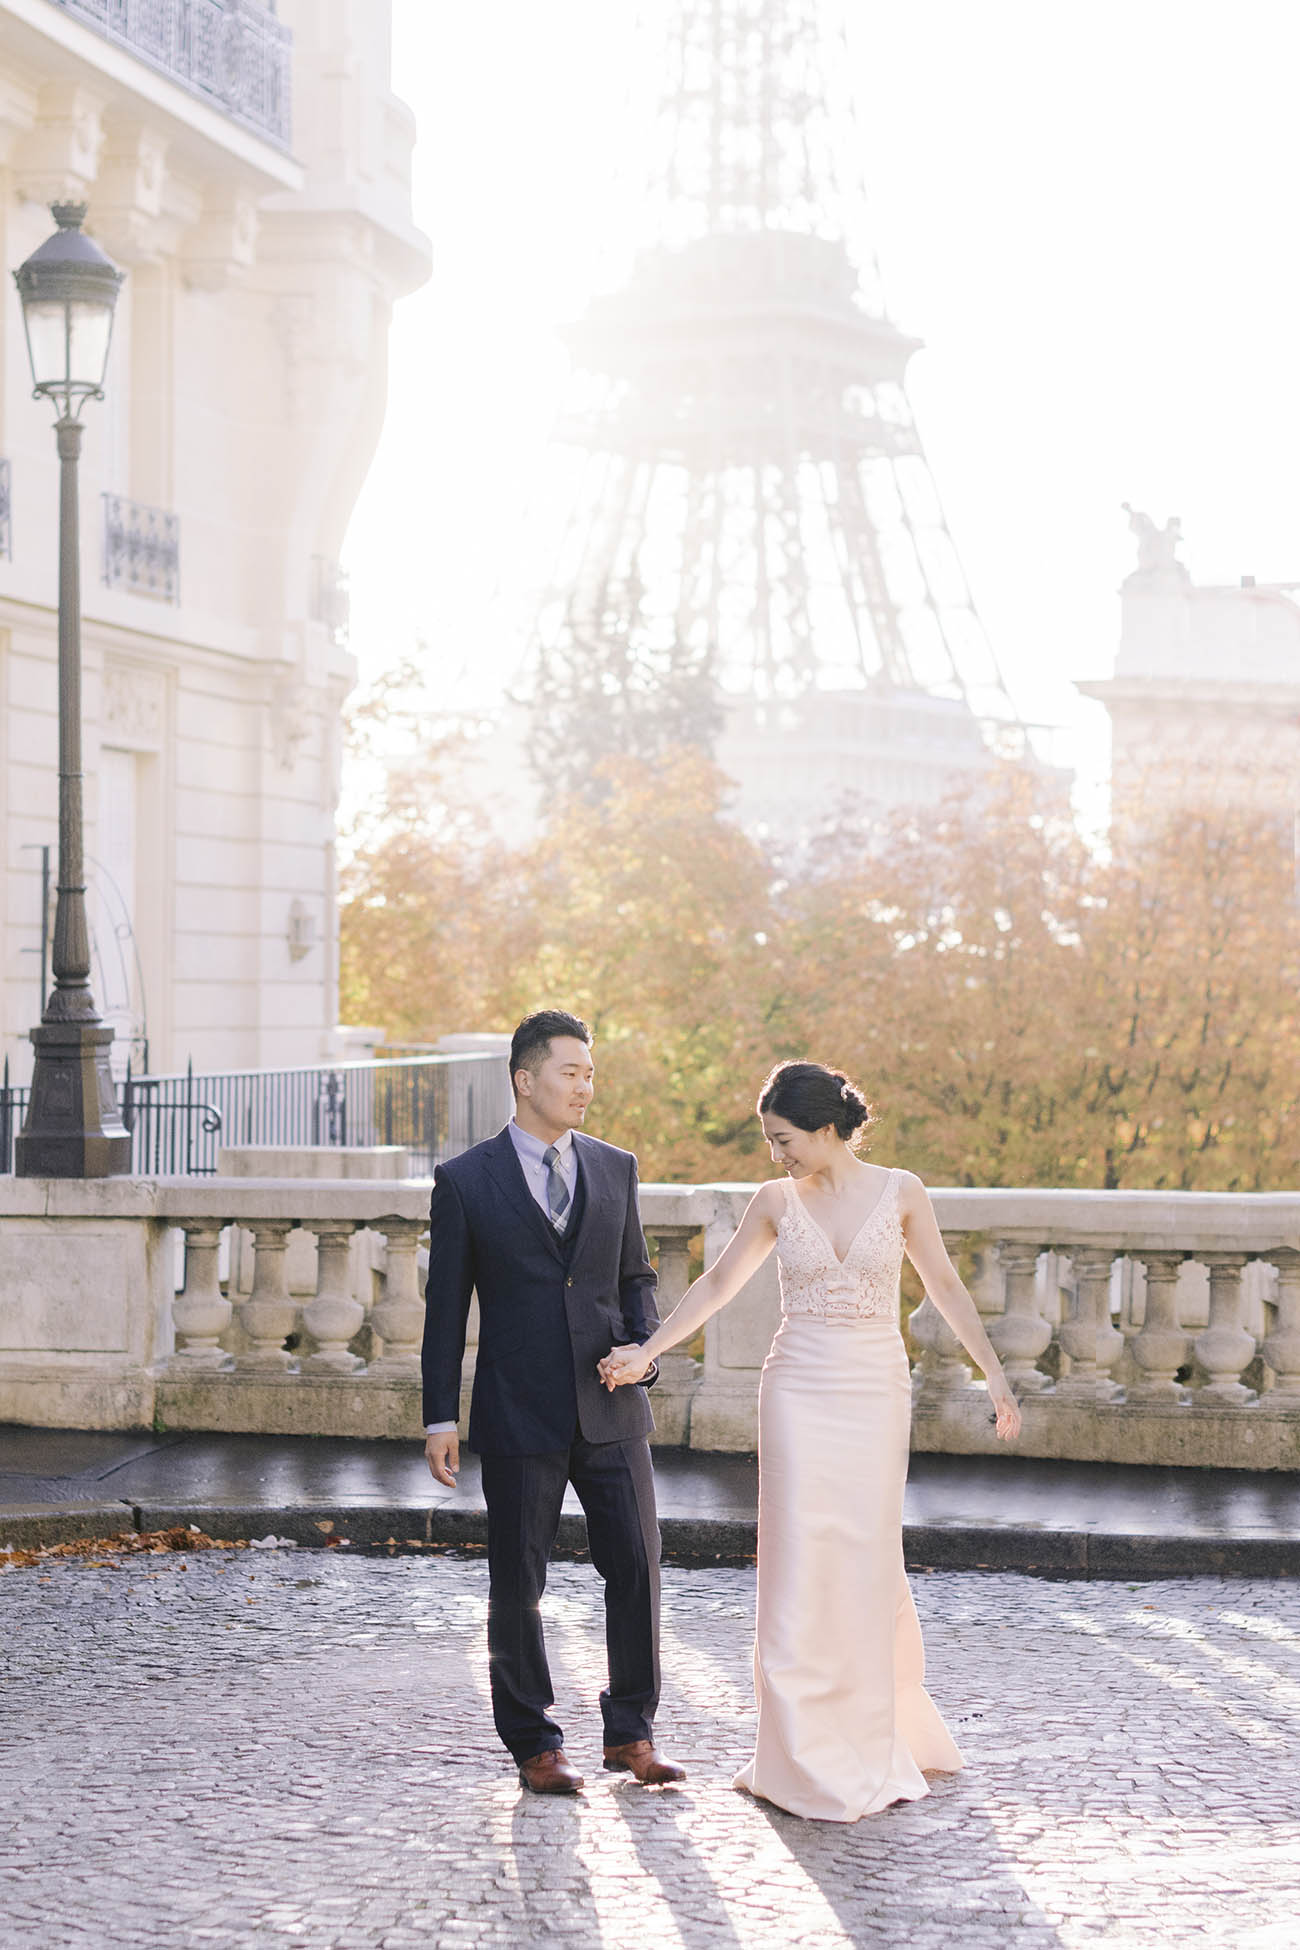  of the bride and groom walk on the street. Behind them the eiffel tower lit by morning light